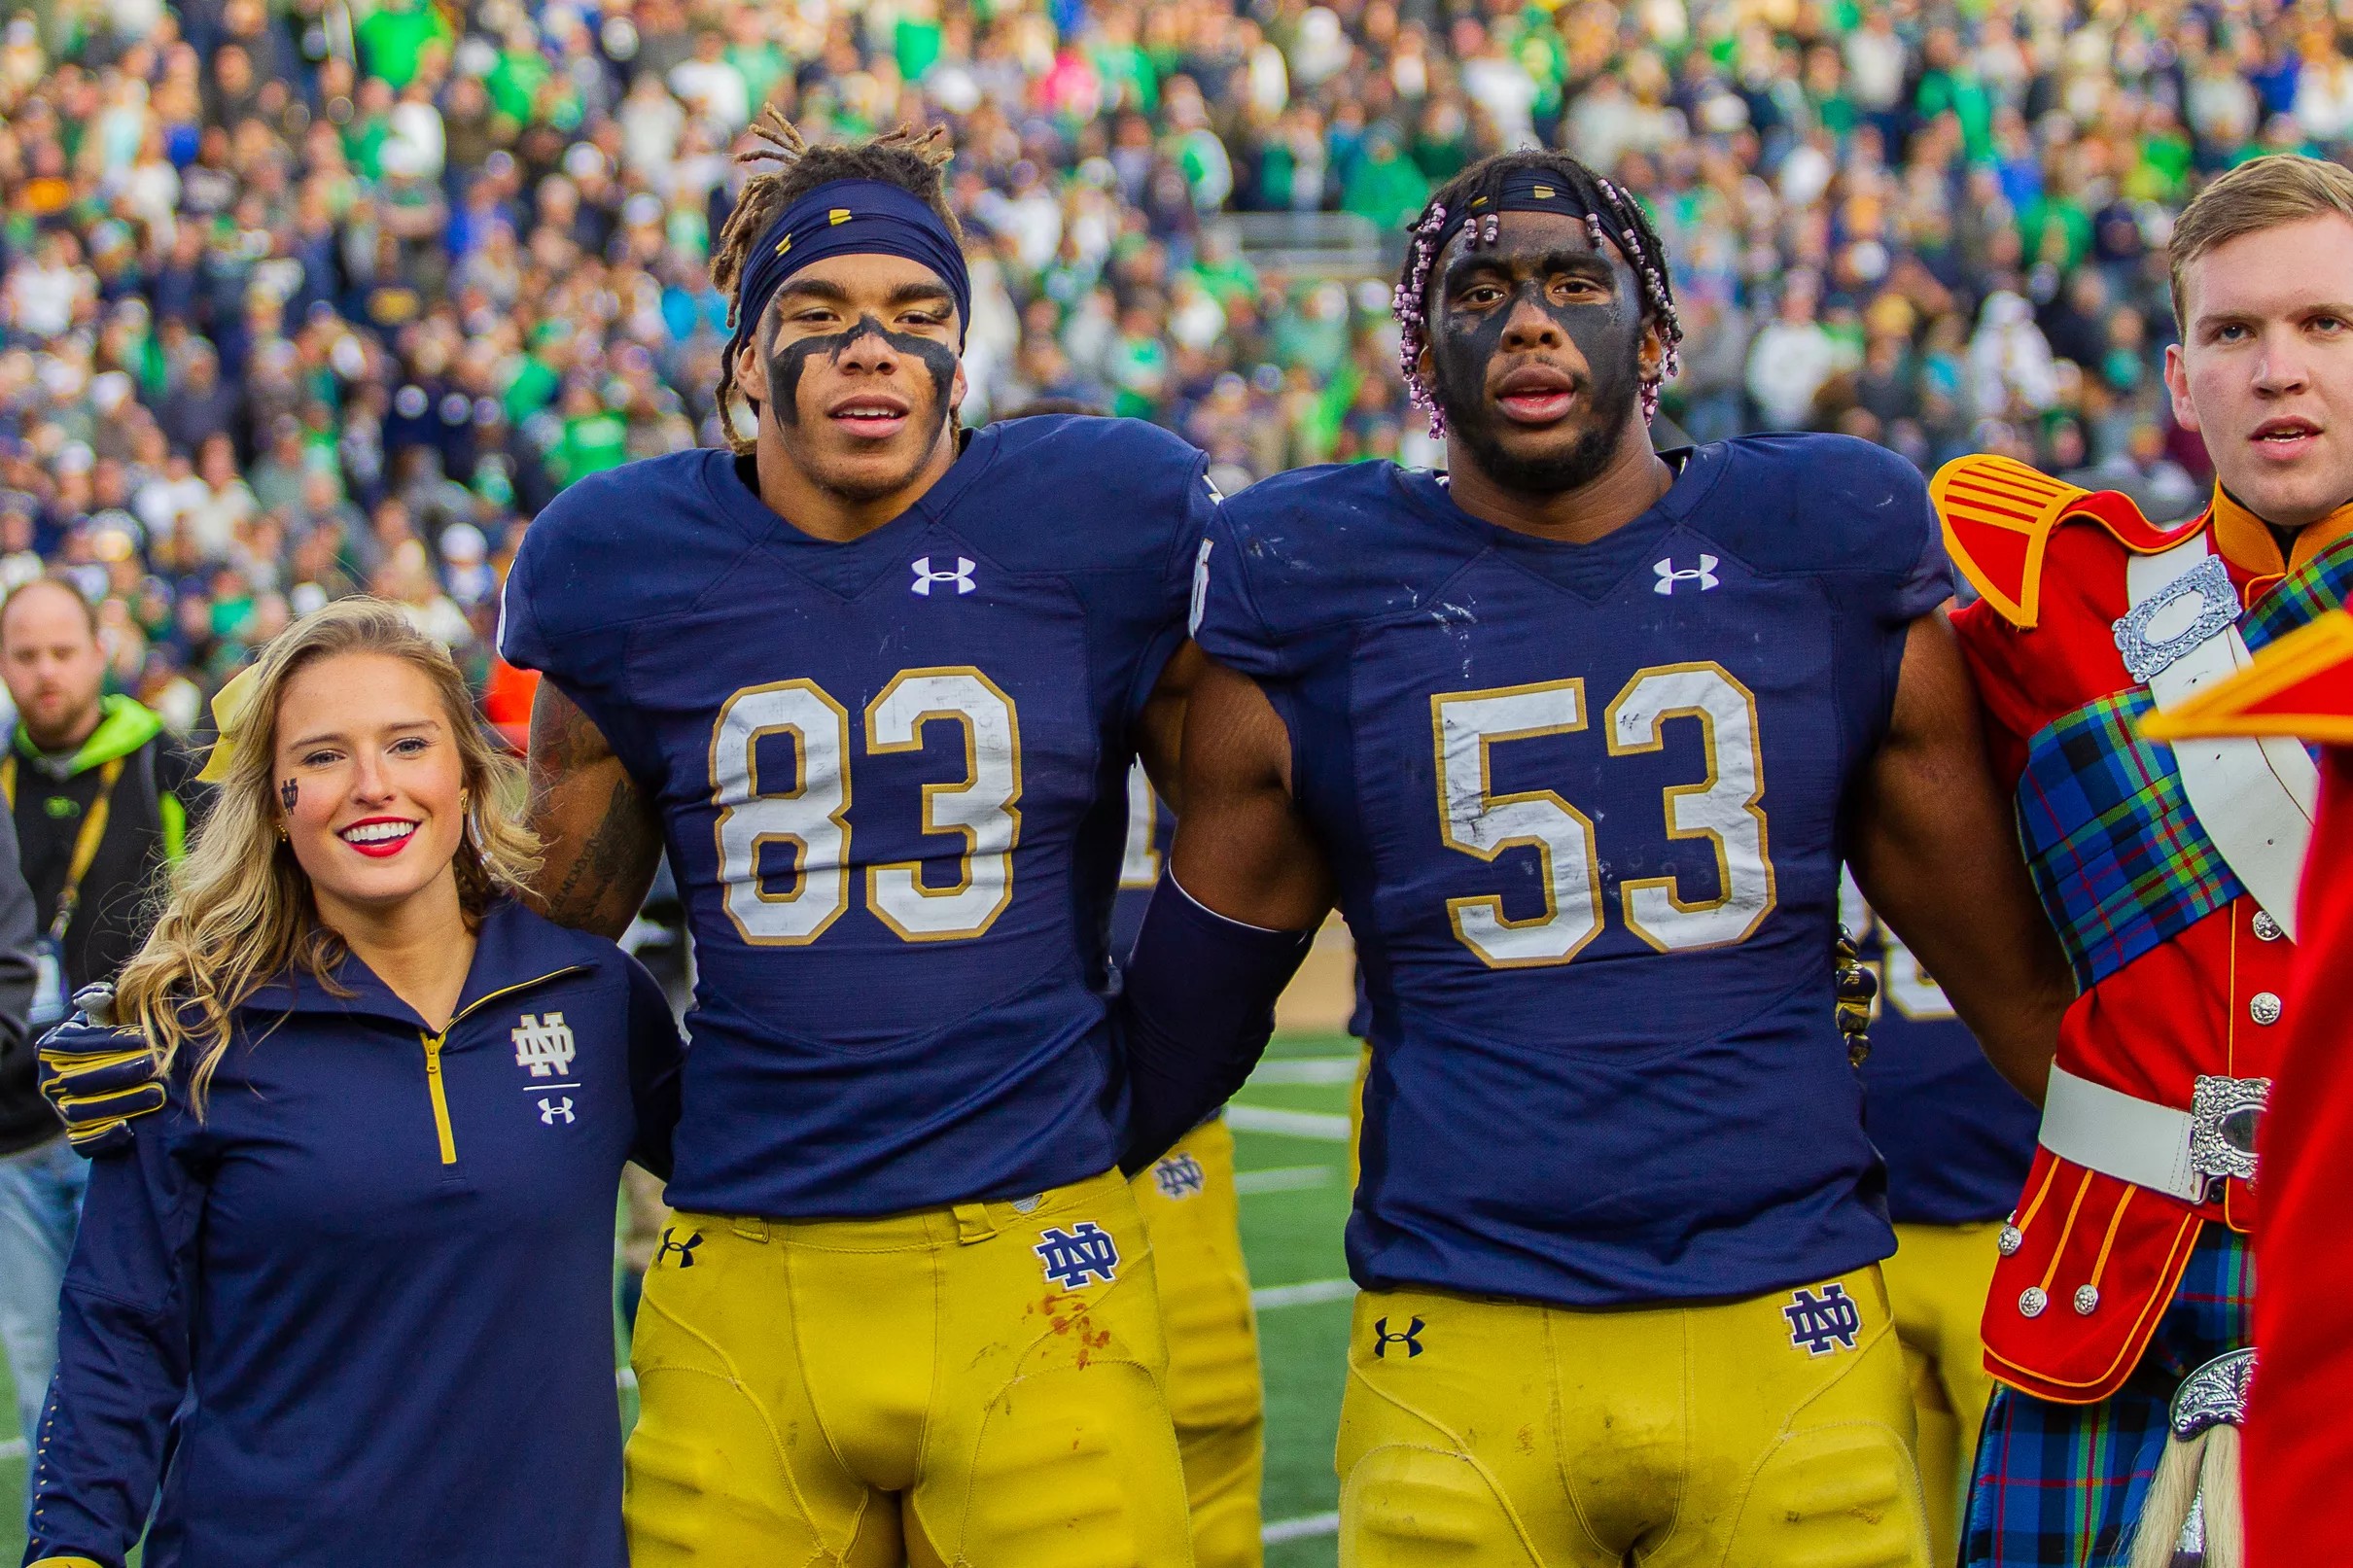 EVERYTHING YOU EVER WANTED TO KNOW ABOUT NOTRE DAME SPRING FOOTBALL